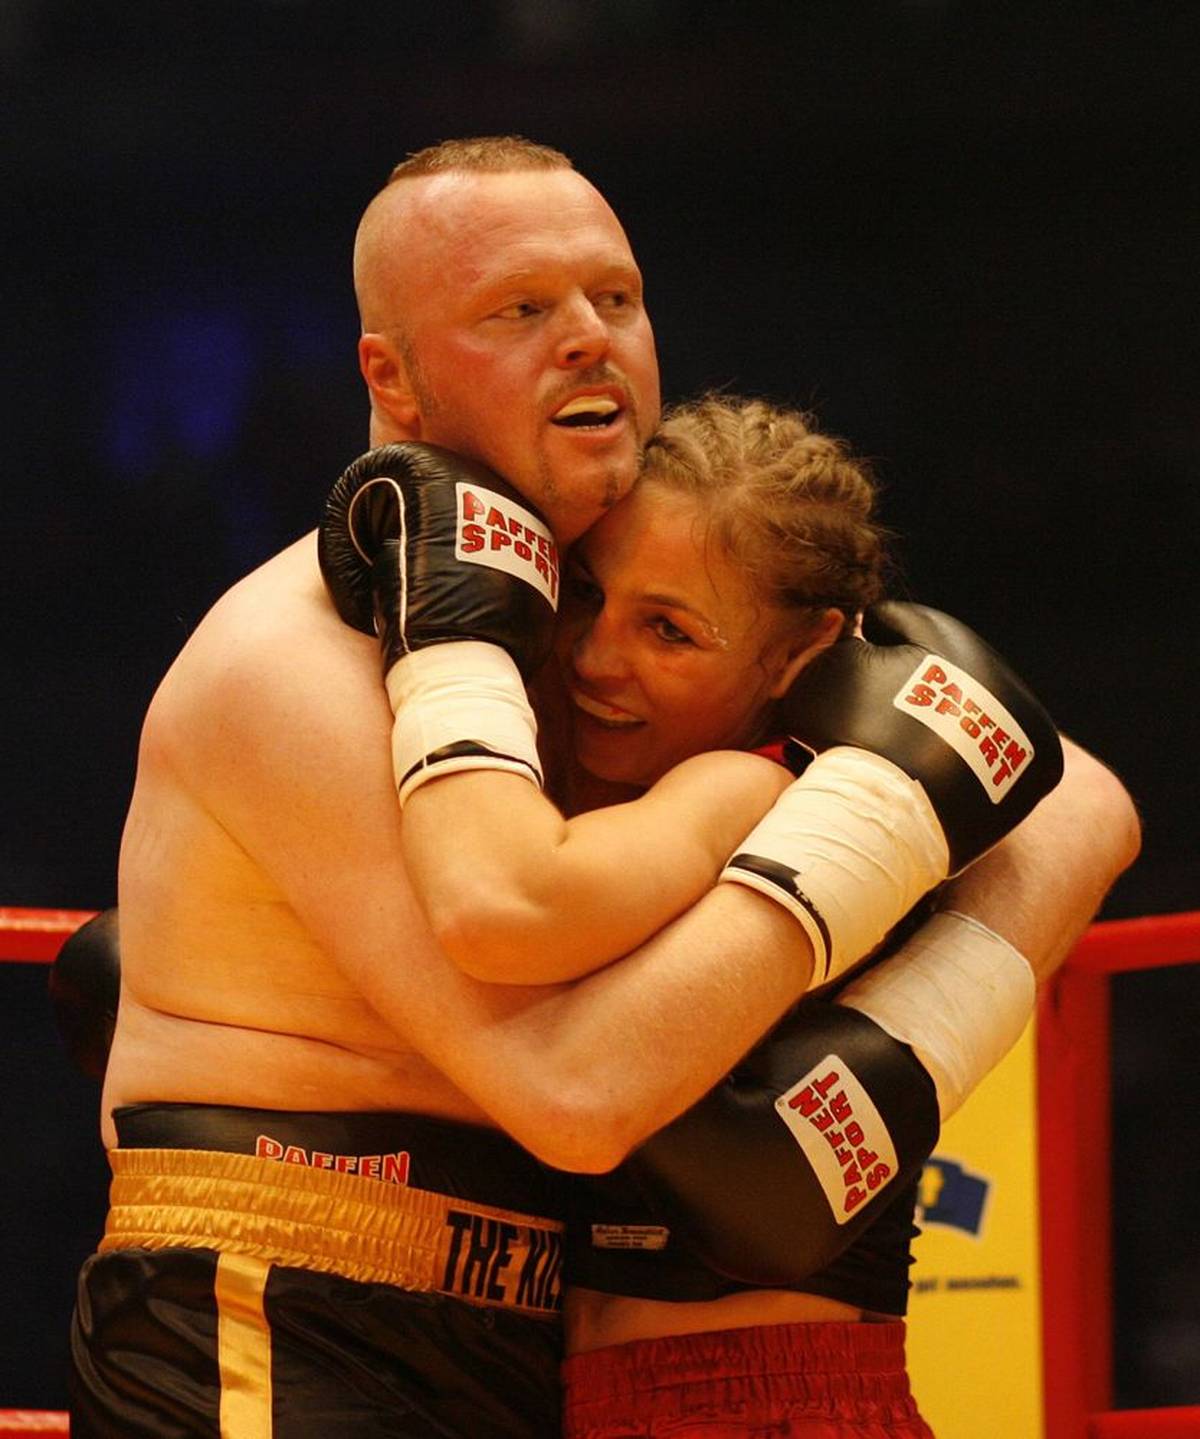 Stefan Raab and Regina Halmich at their second boxing match in Cologne in 2007